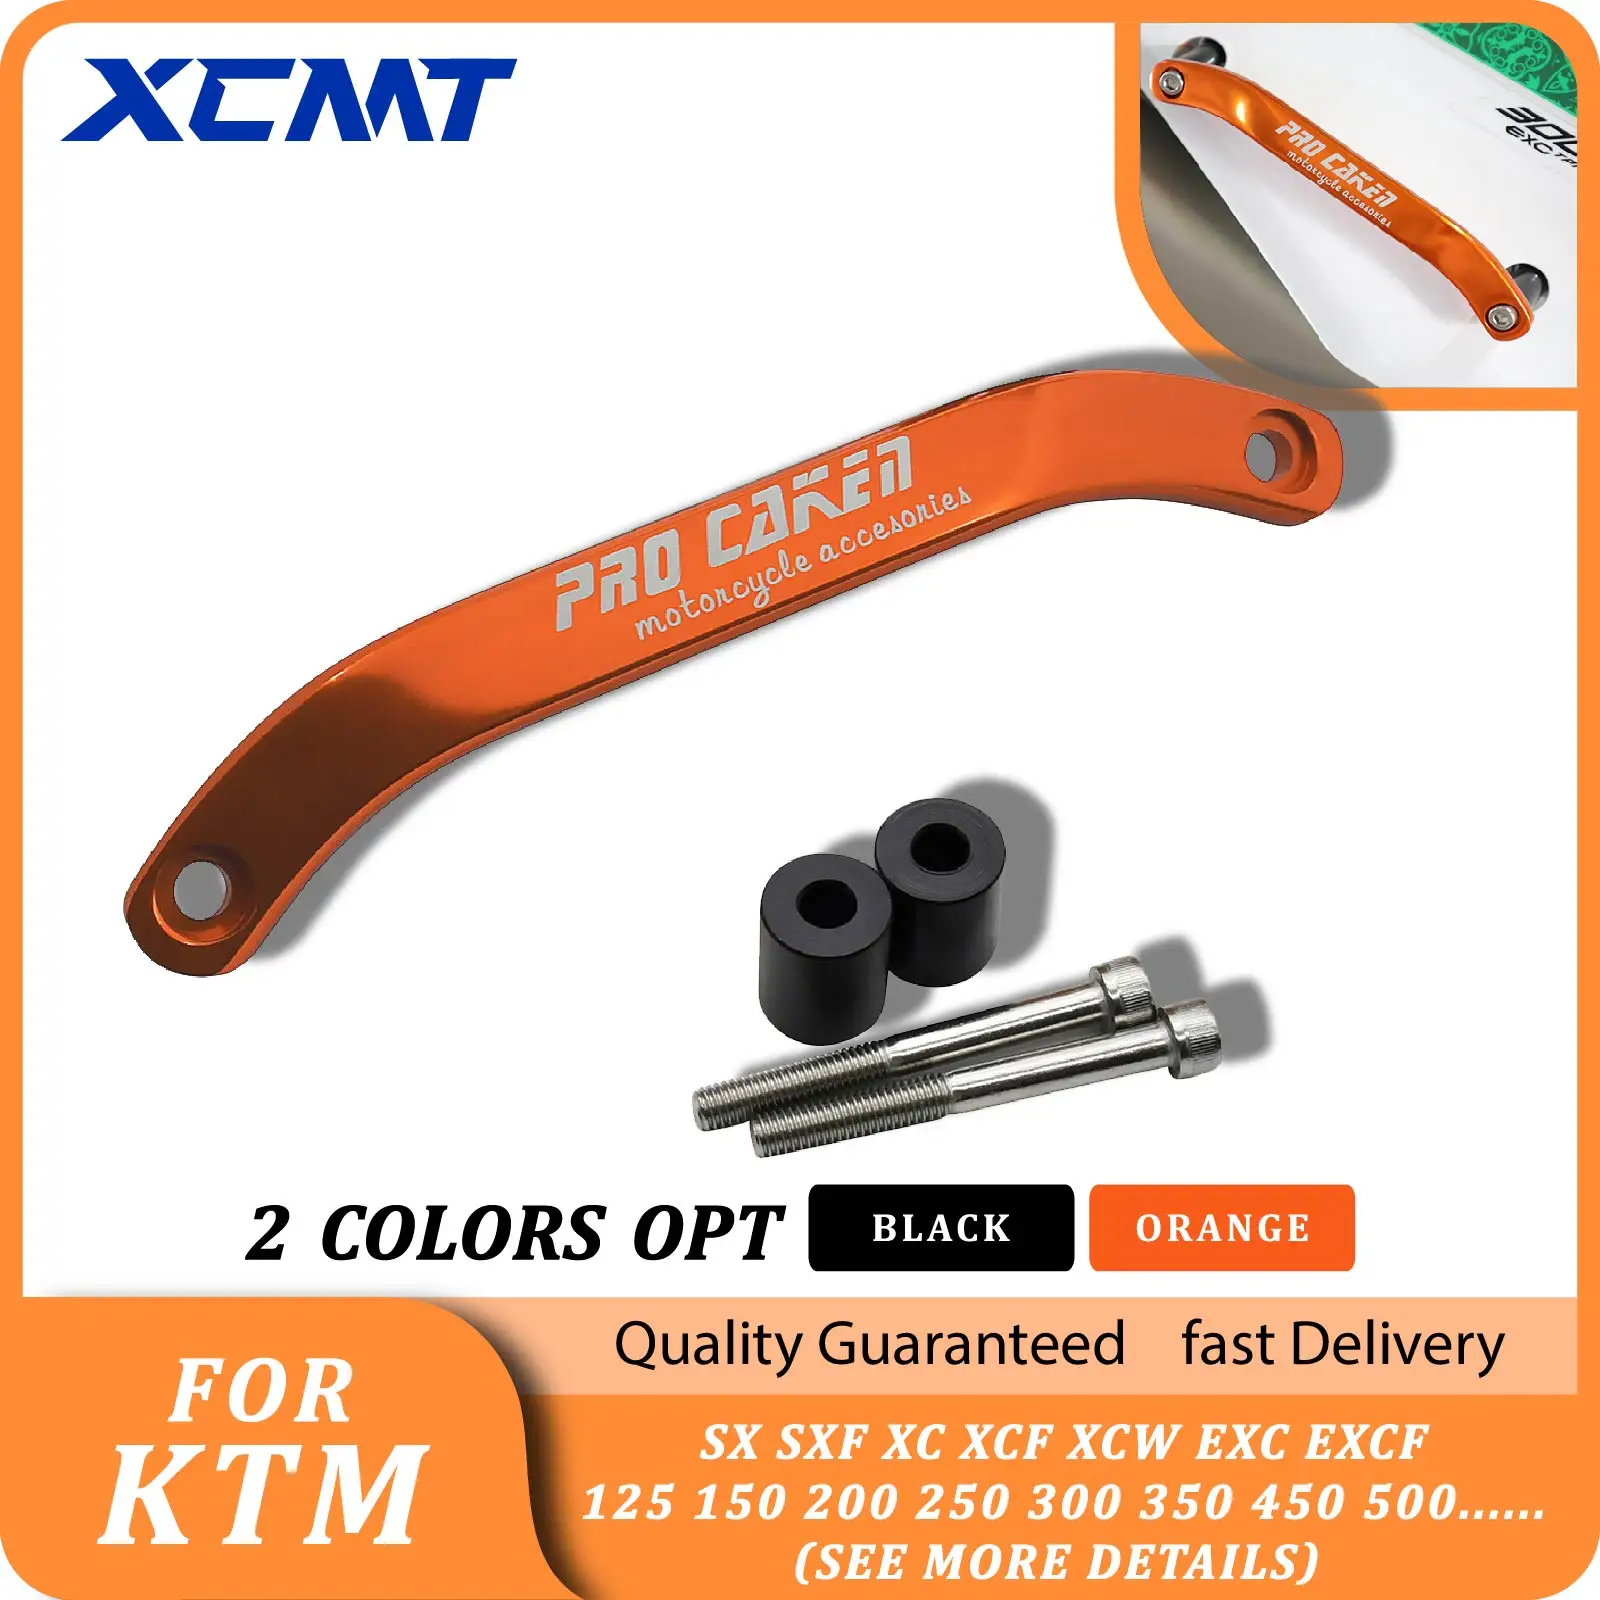 

CNC Rear Grab Handle For KTM SX SXF XC XCF XCW EXC EXCF 125 150 200 250 300 350 450 500 Motorcycle Accessories Handrail Lever